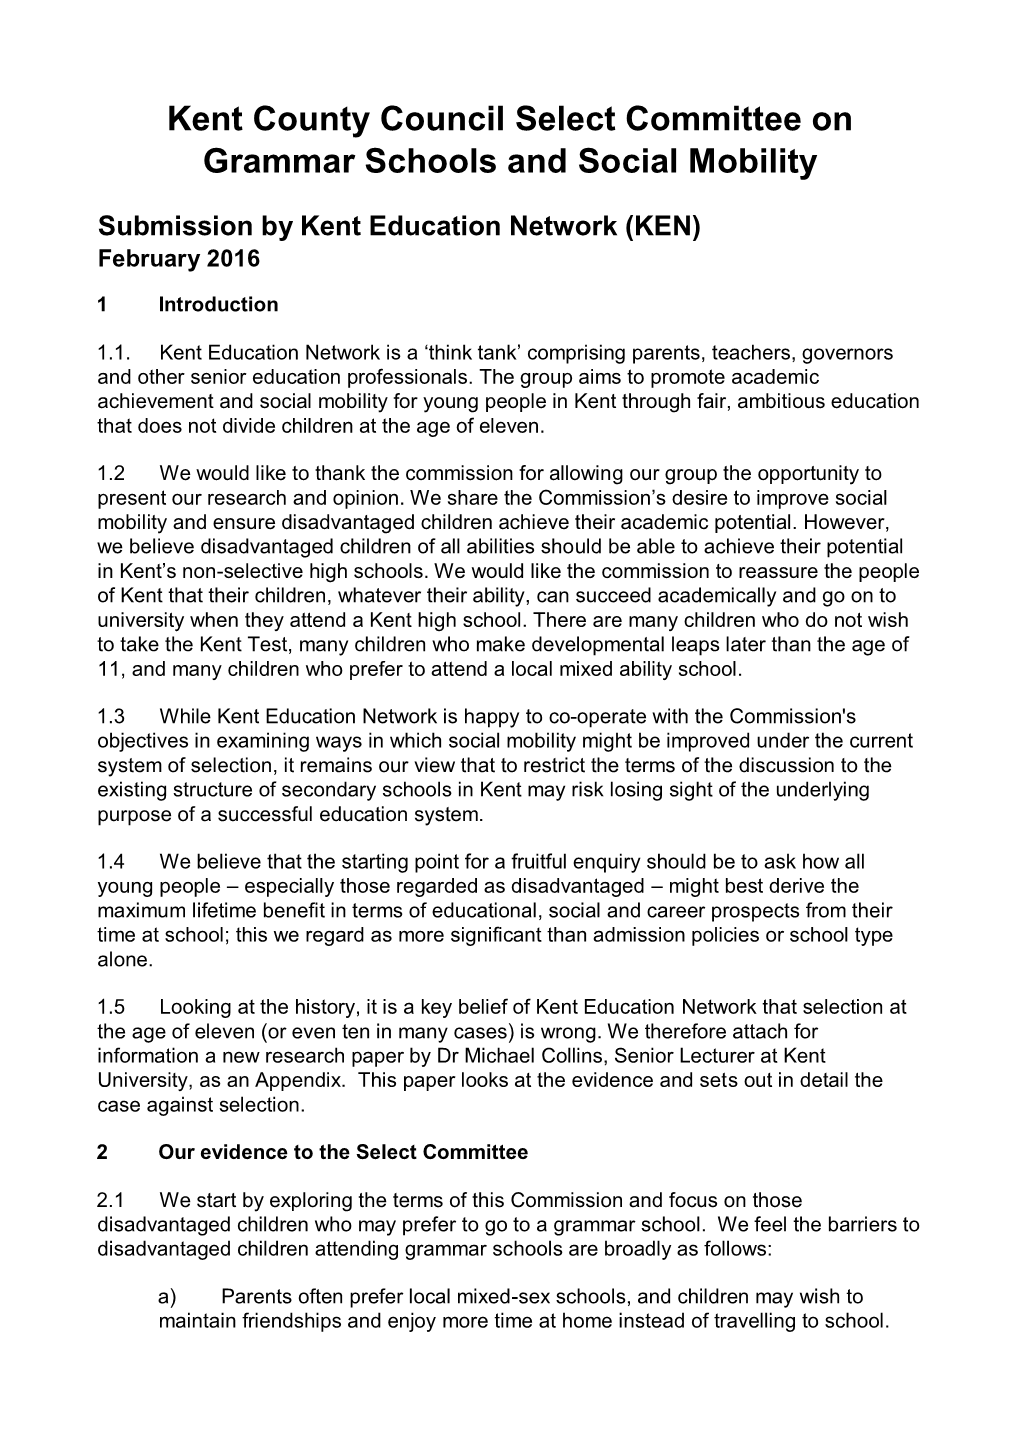 Kent County Council Select Committee on Grammar Schools and Social Mobility